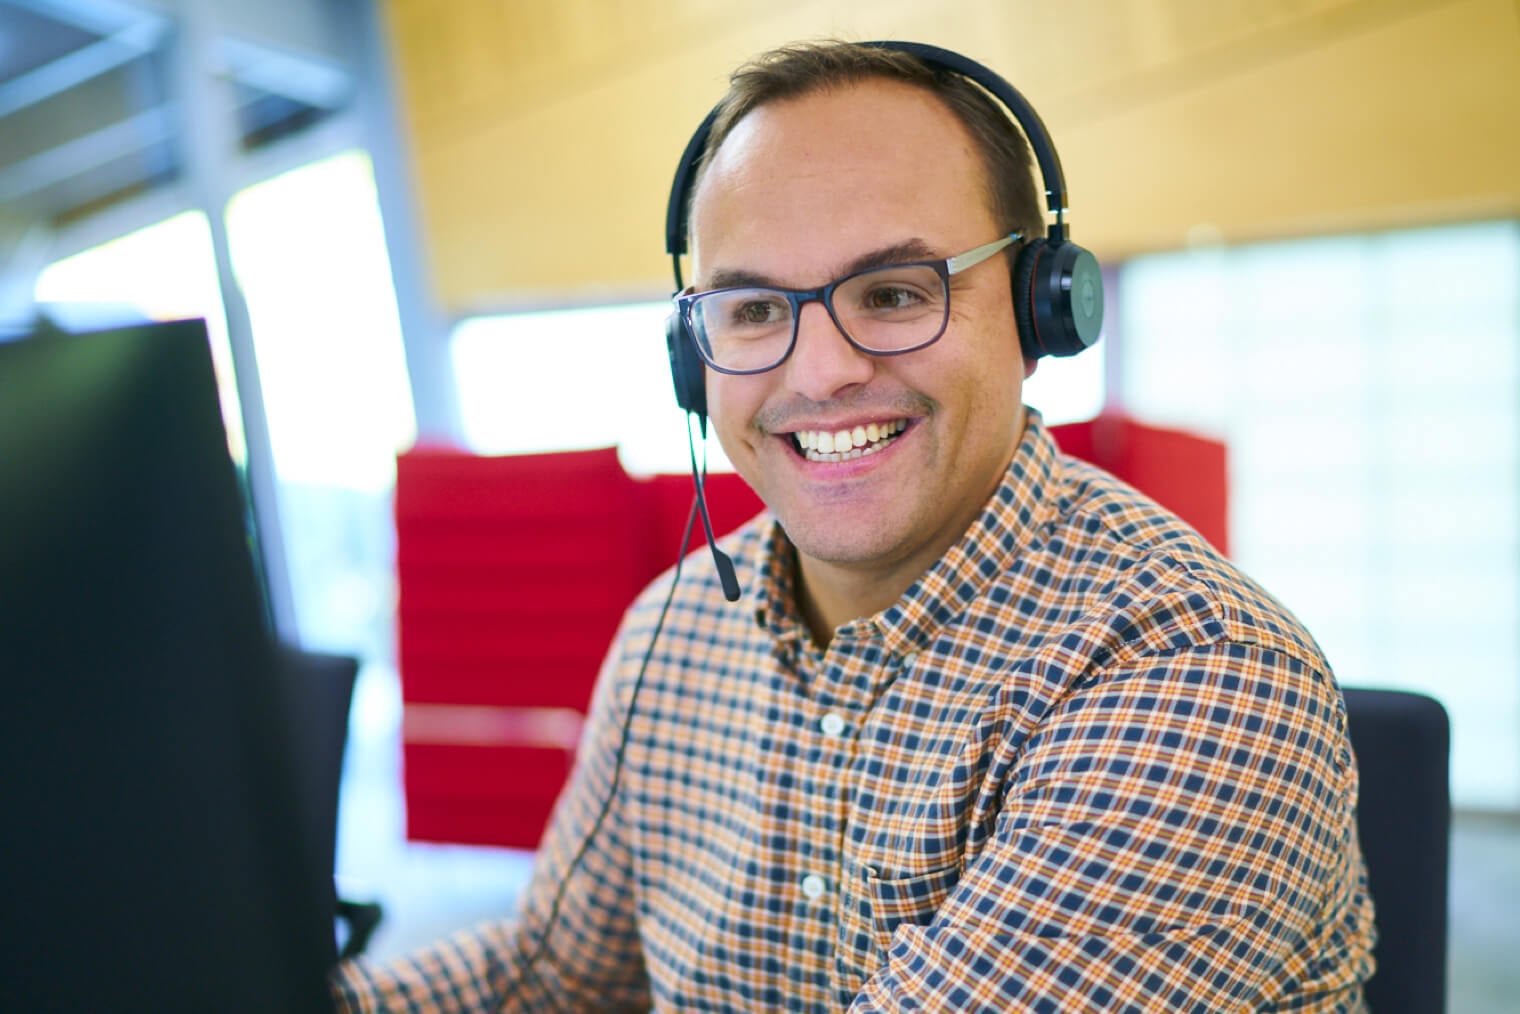 A customer service rep looking very happy while wearing a headset.